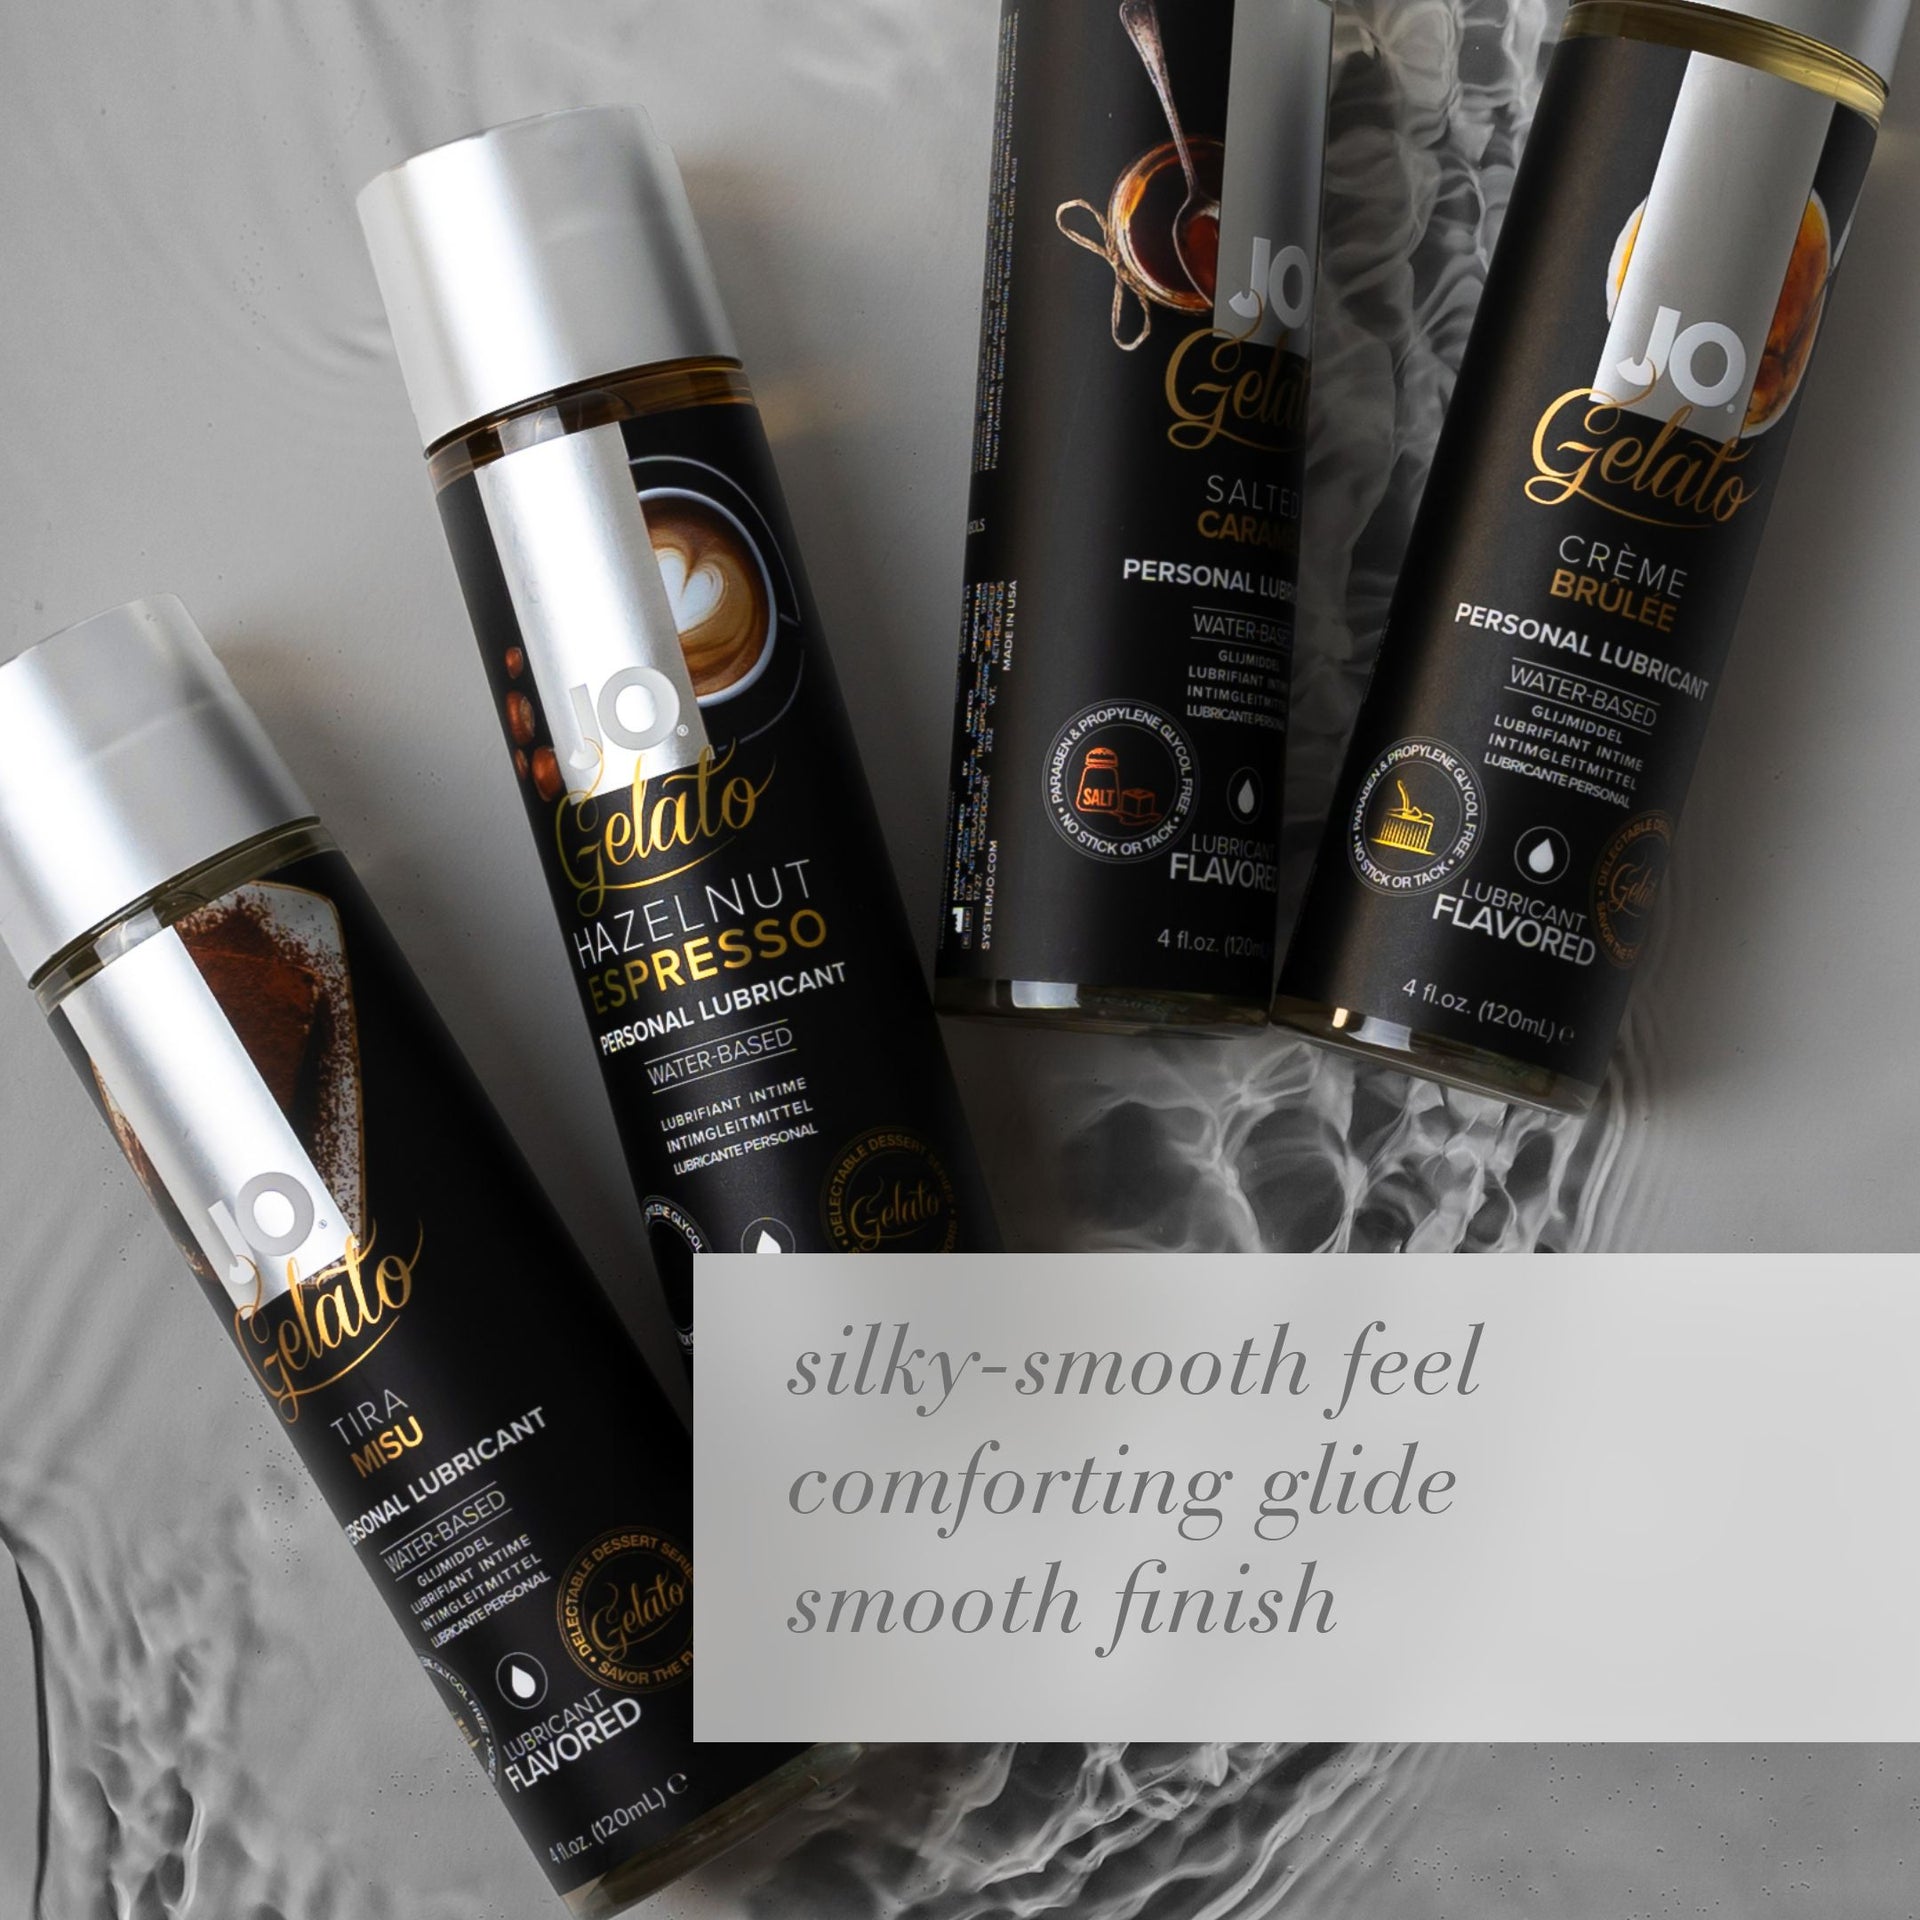 creme brulee gelato lubricant claims 